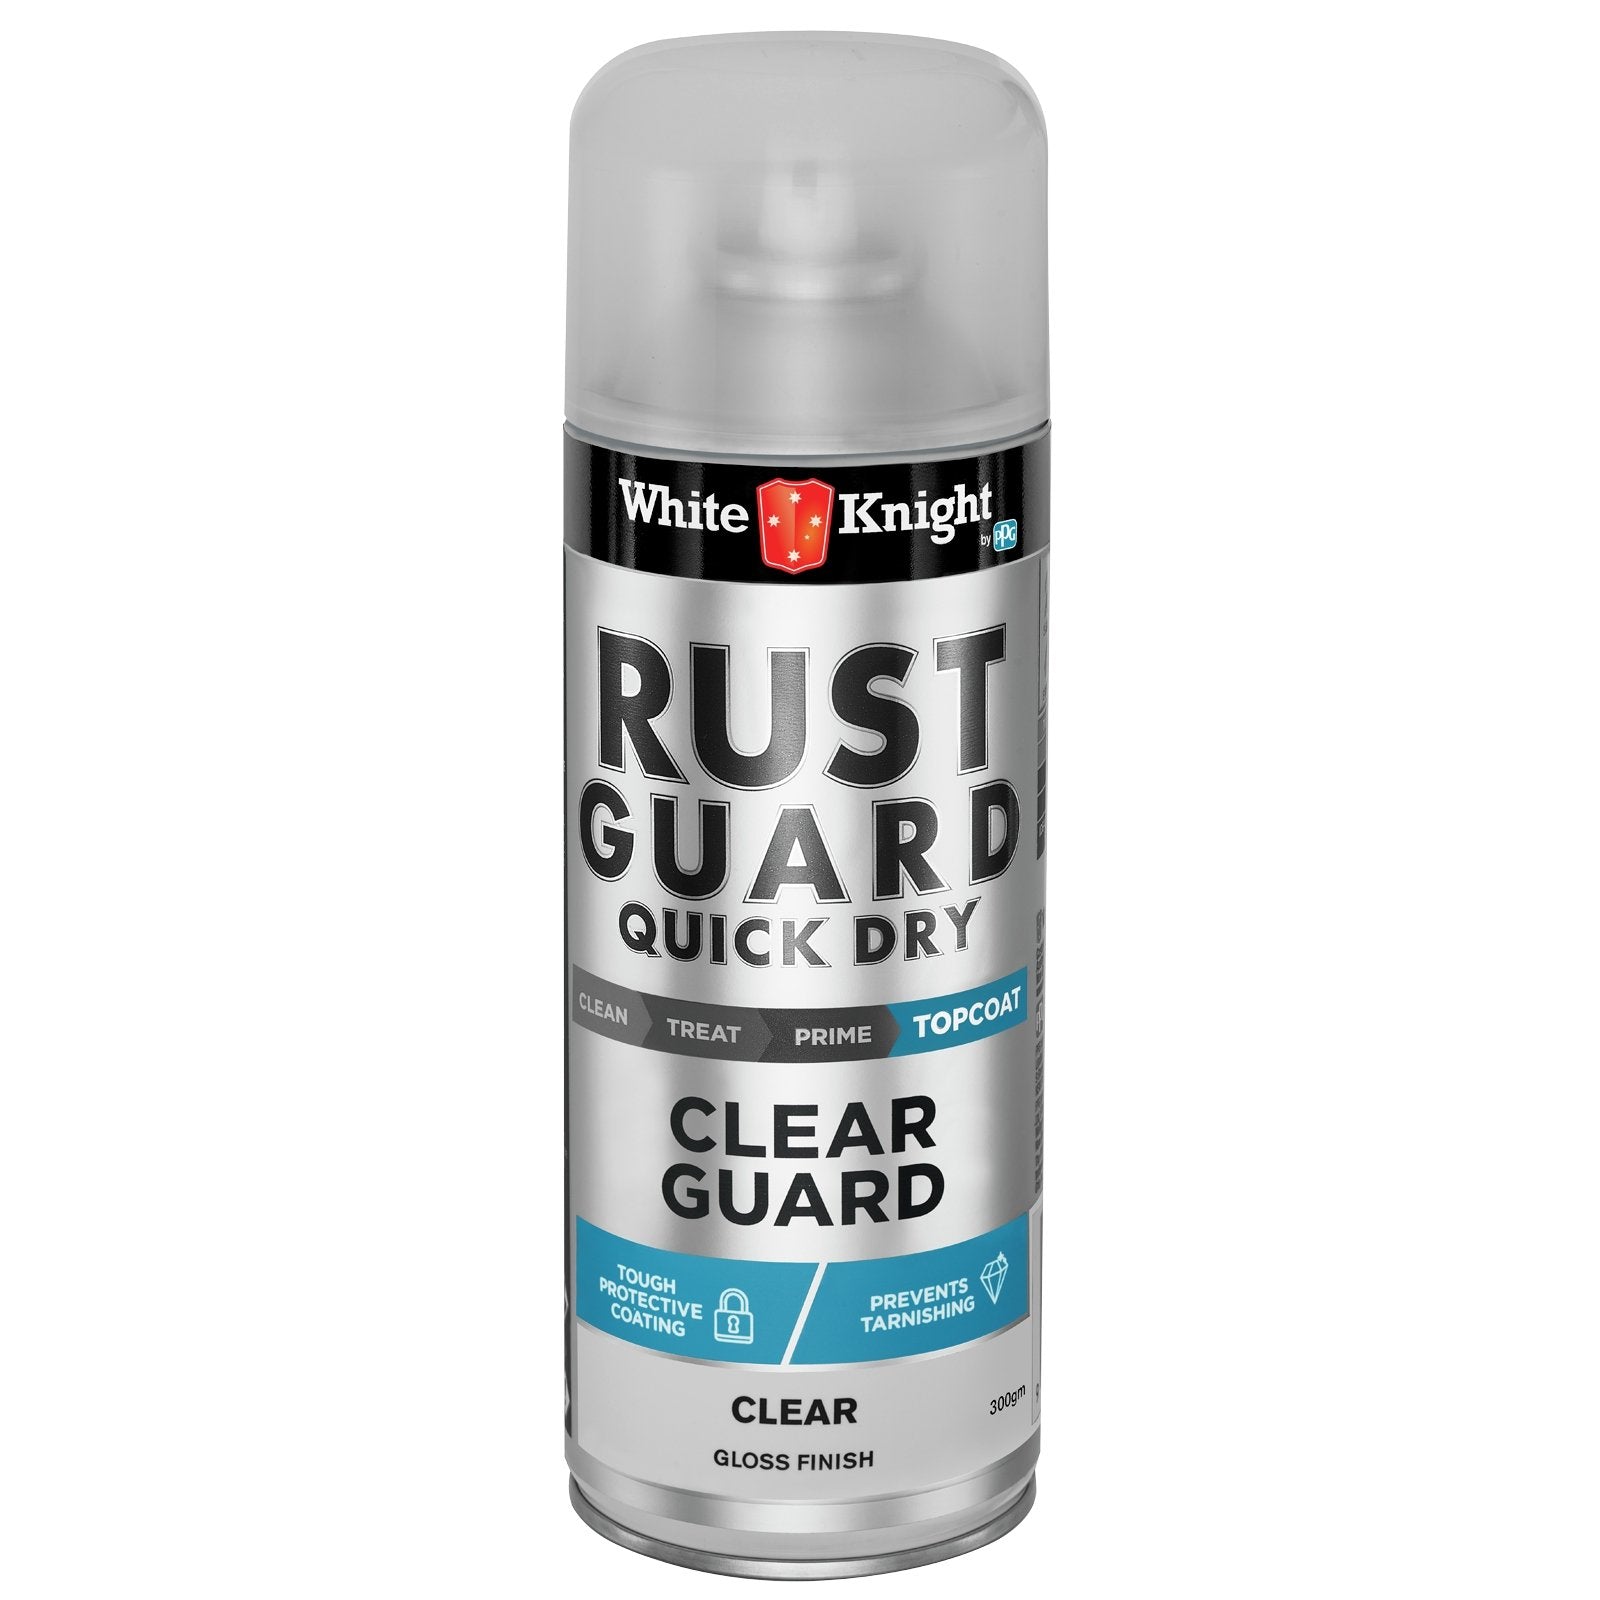 White Knight Rust Guard Clear Guard Quick Dry Spray Paint 300g 375533/300GM - Double Bay Hardware